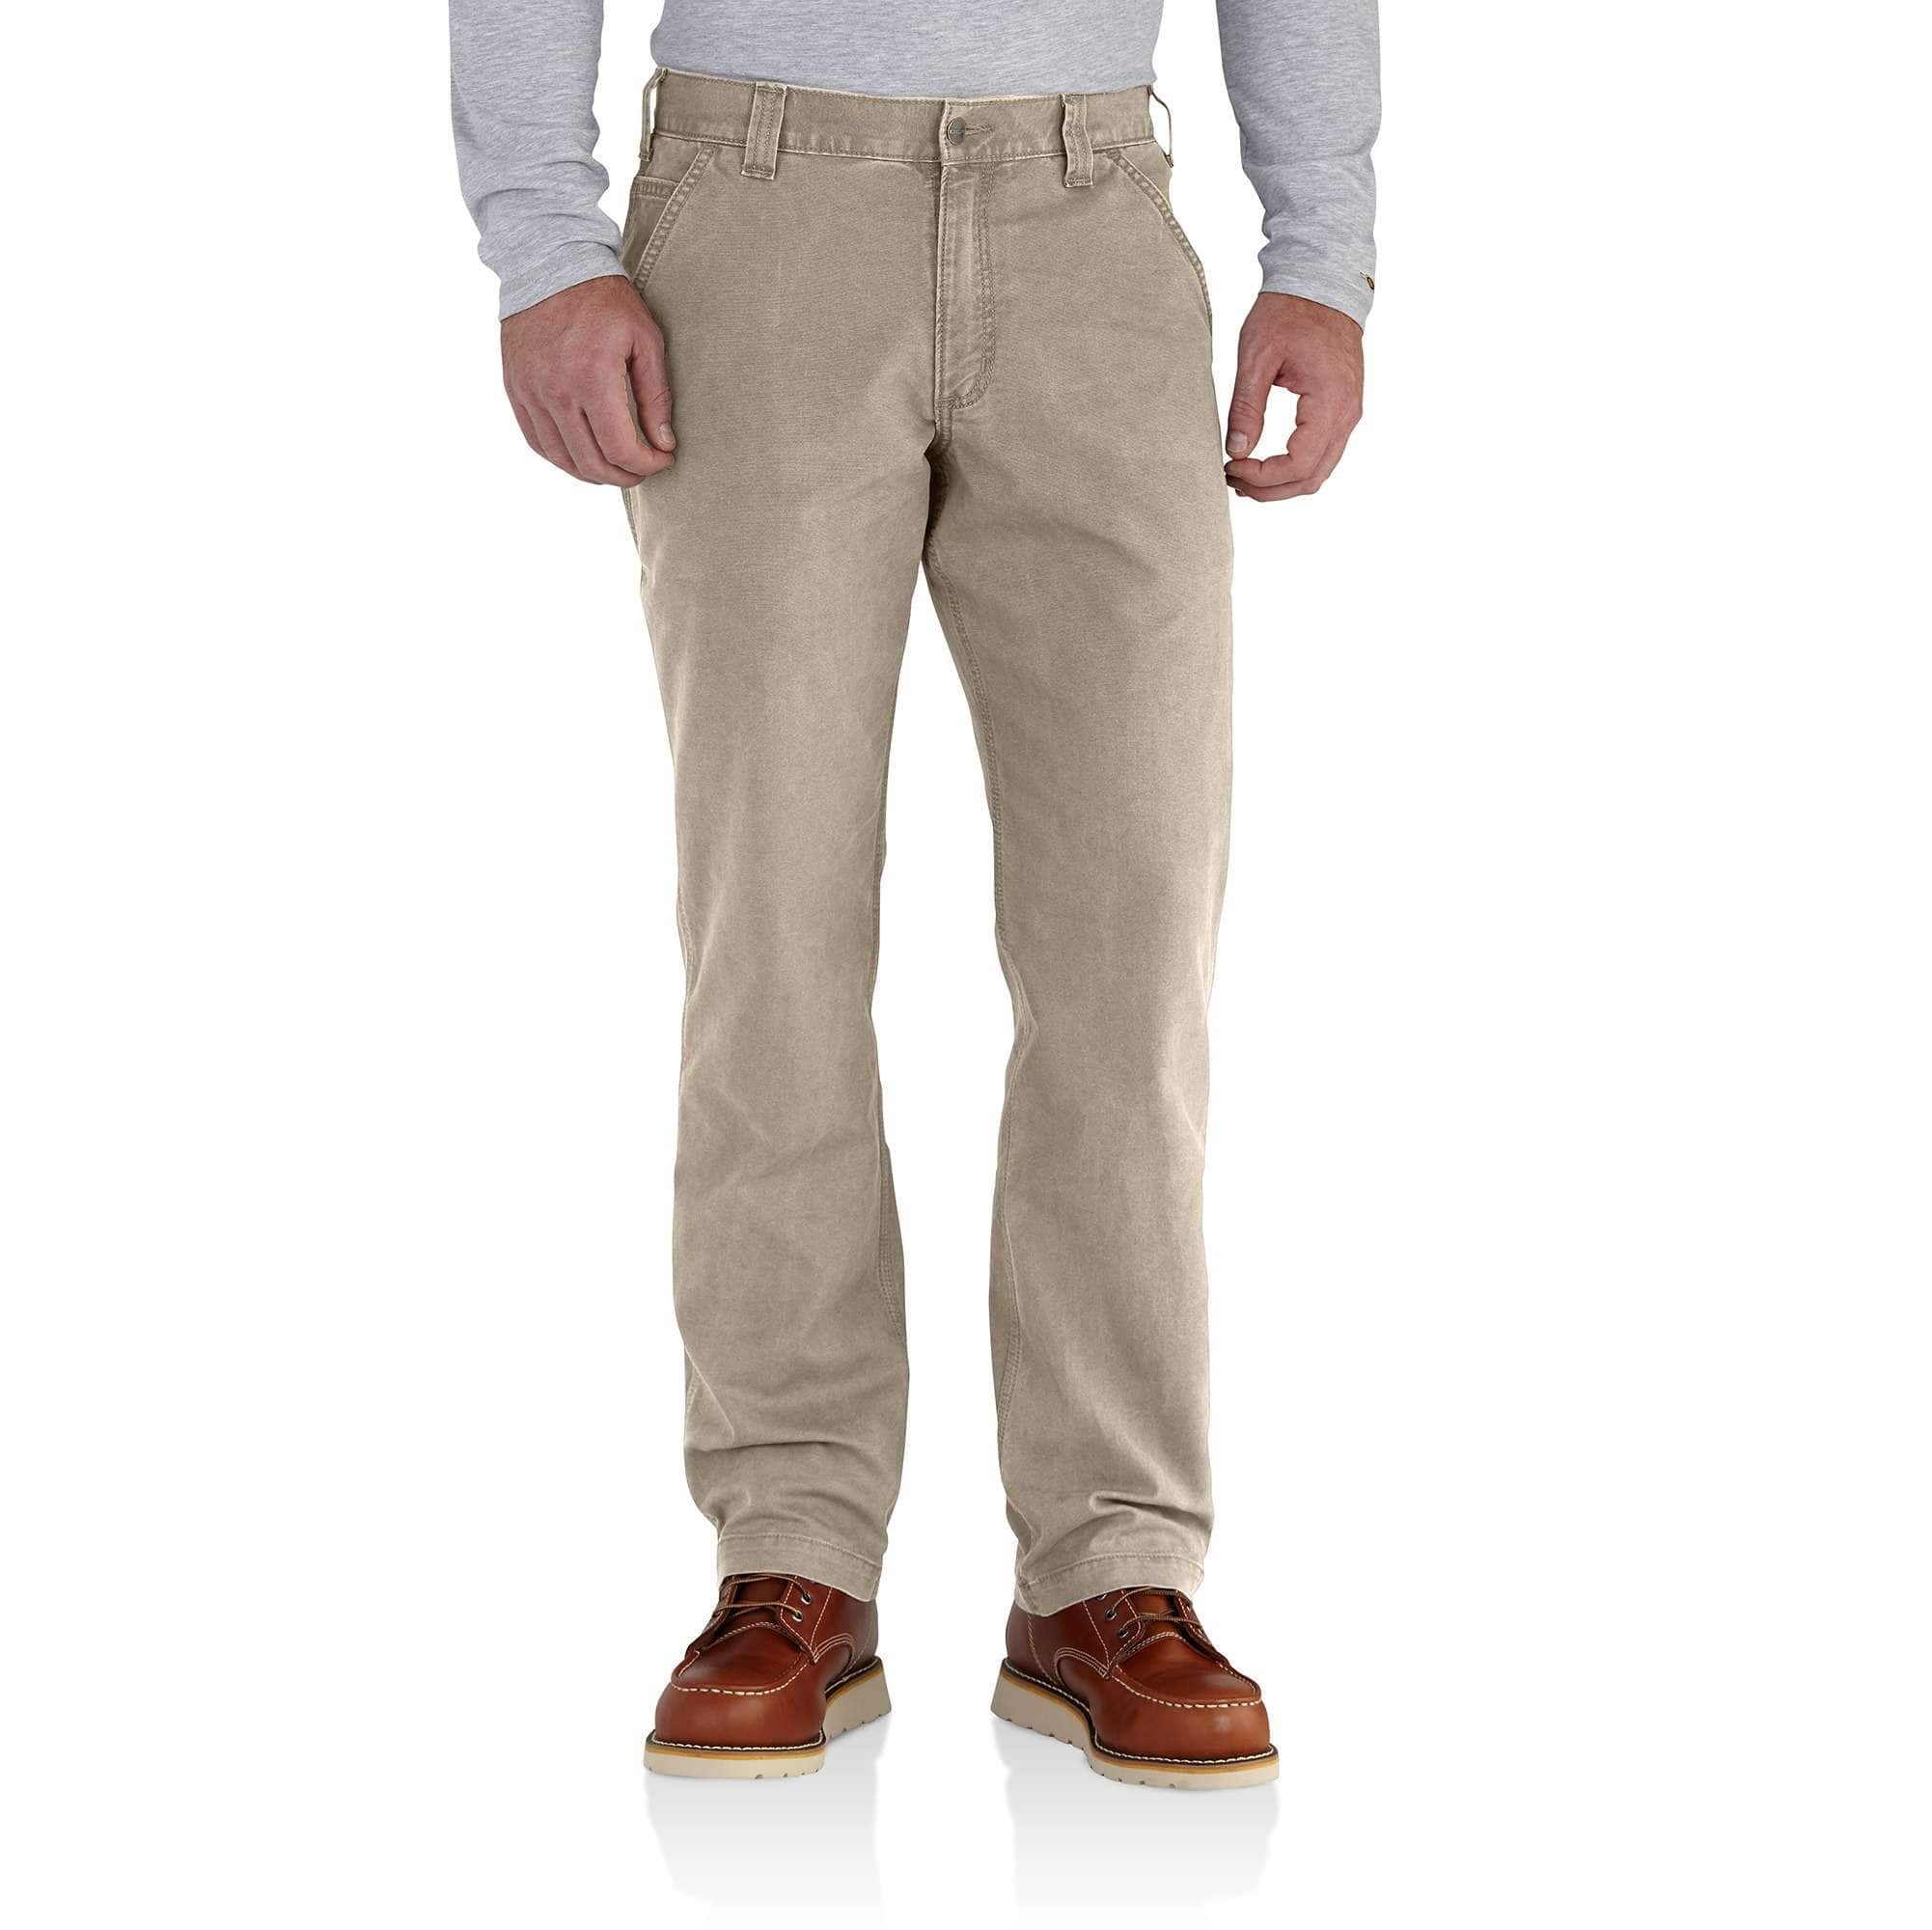 Carhartt 30x34 Moss Ripstop Cargo Work Pants, Relaxed Fit - Henery